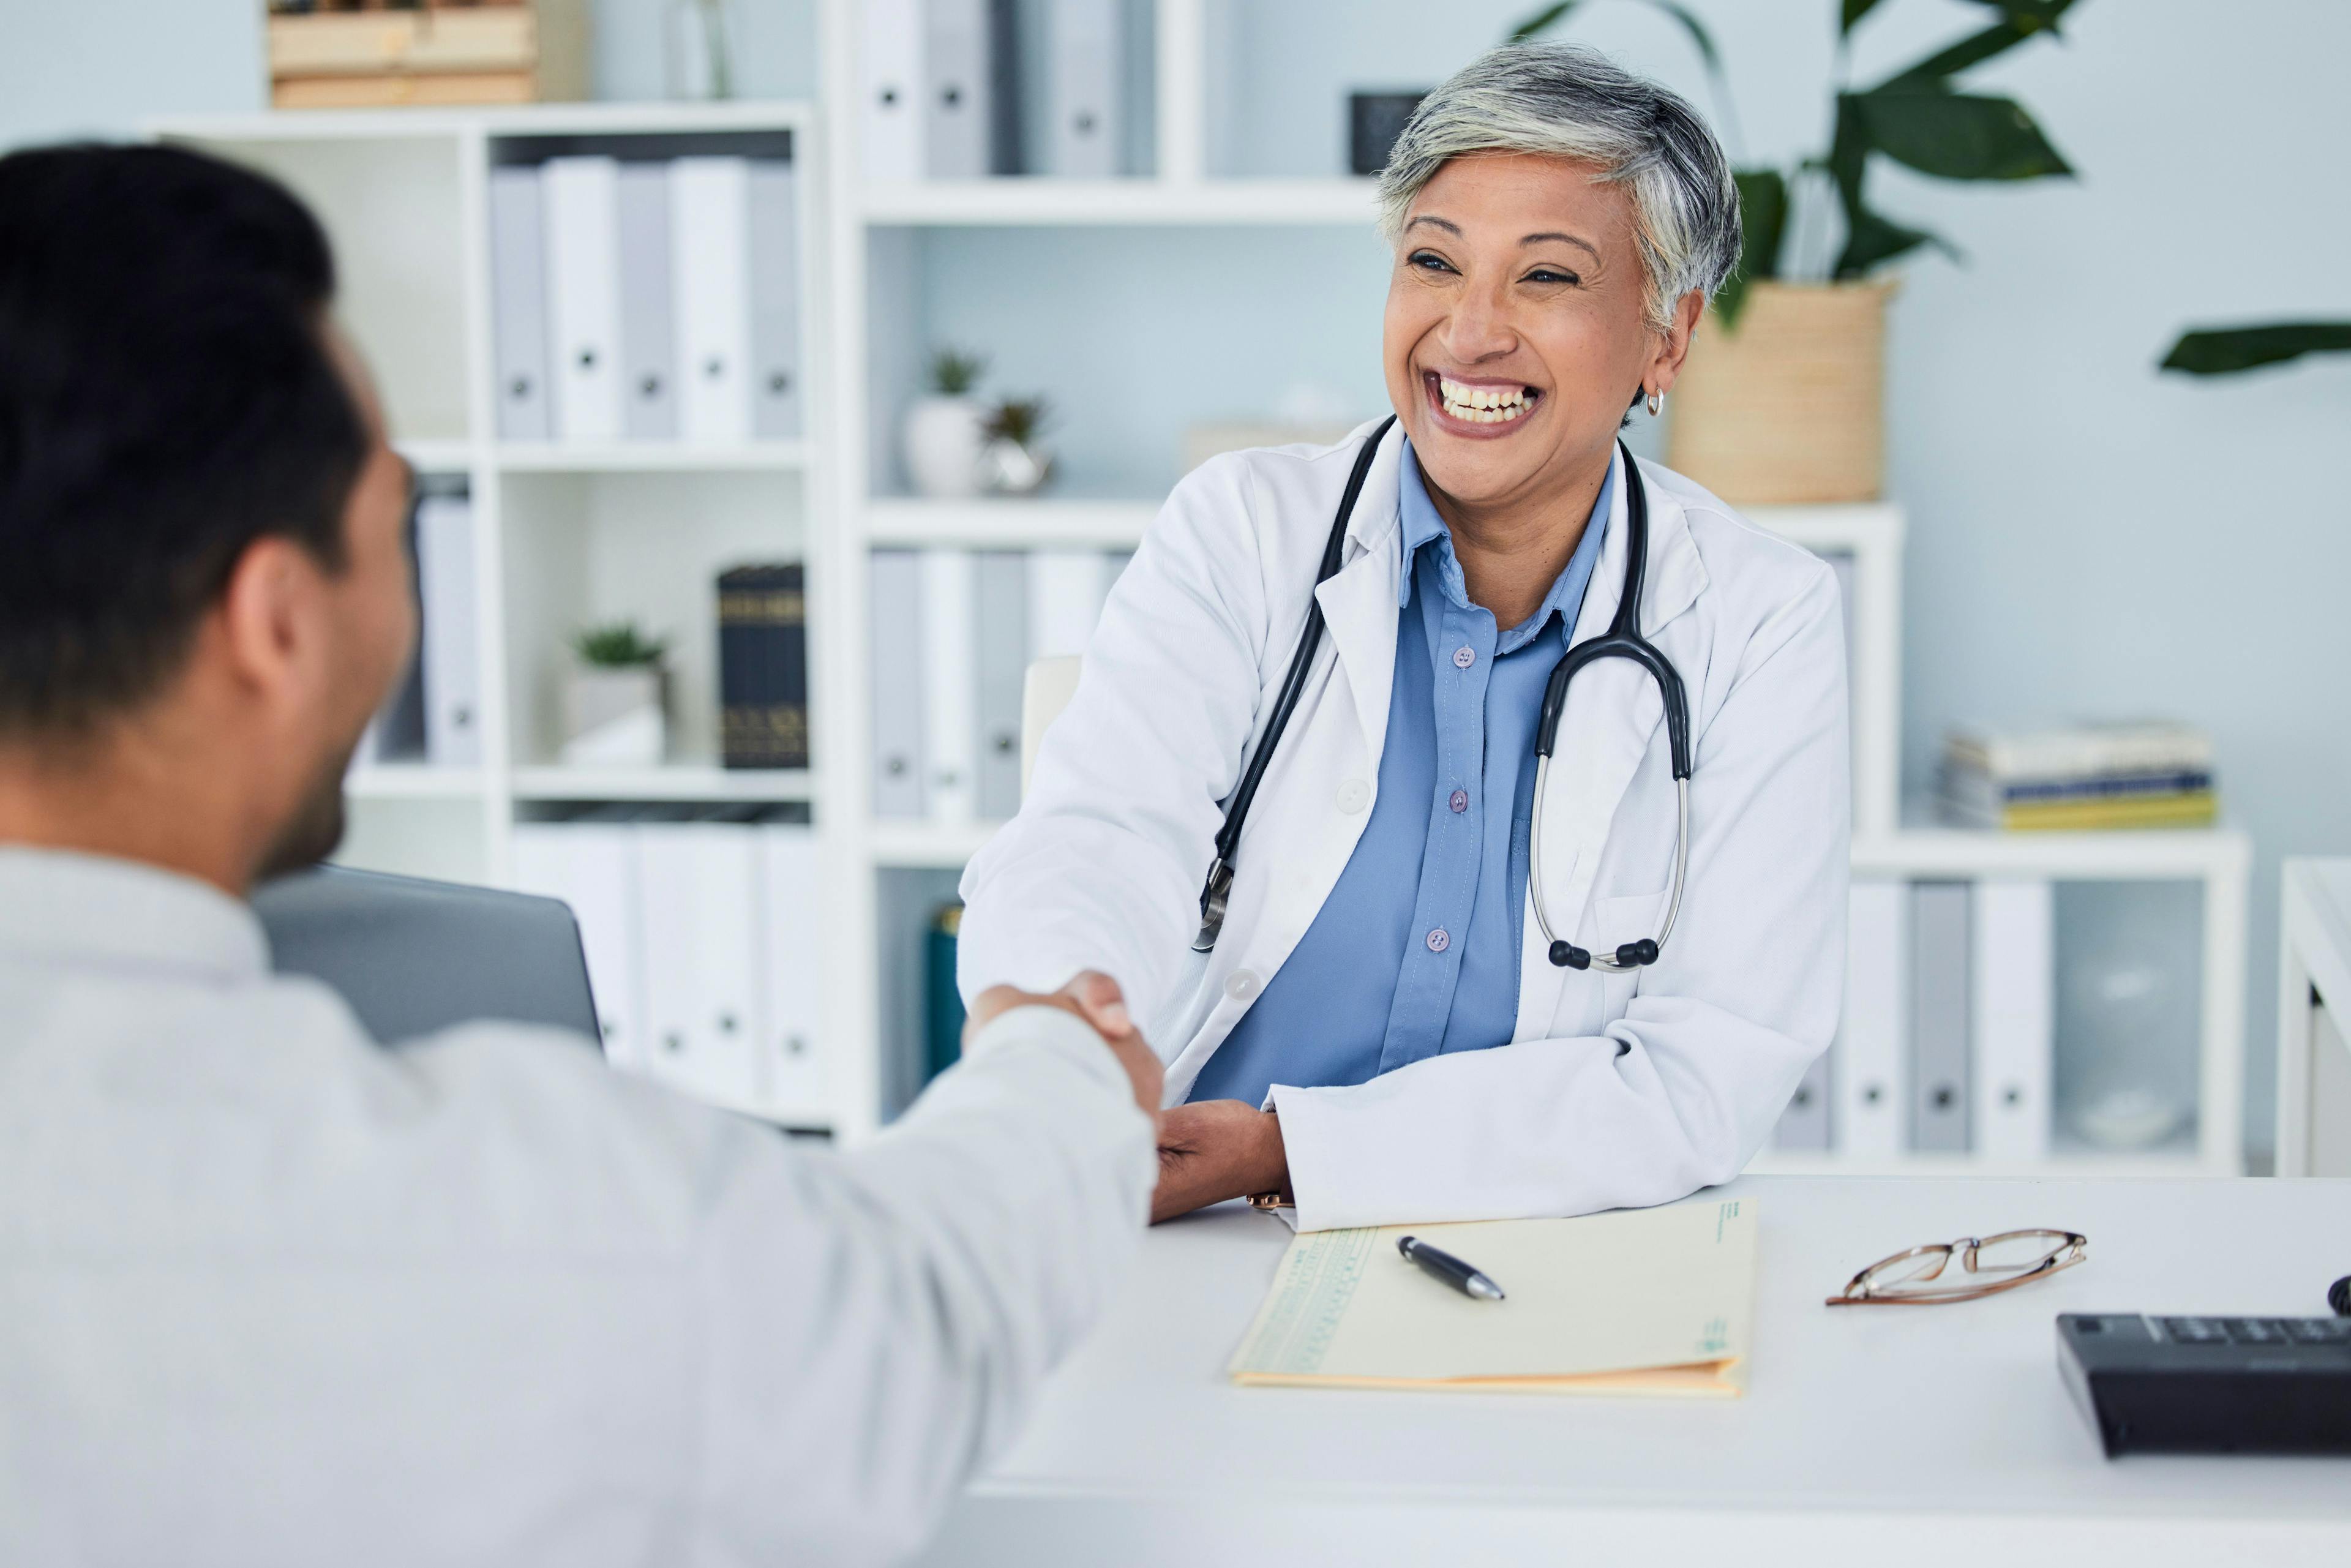 Physicians are only staying in their first job for two years, on average: ©Nadial - stock.adobe.com